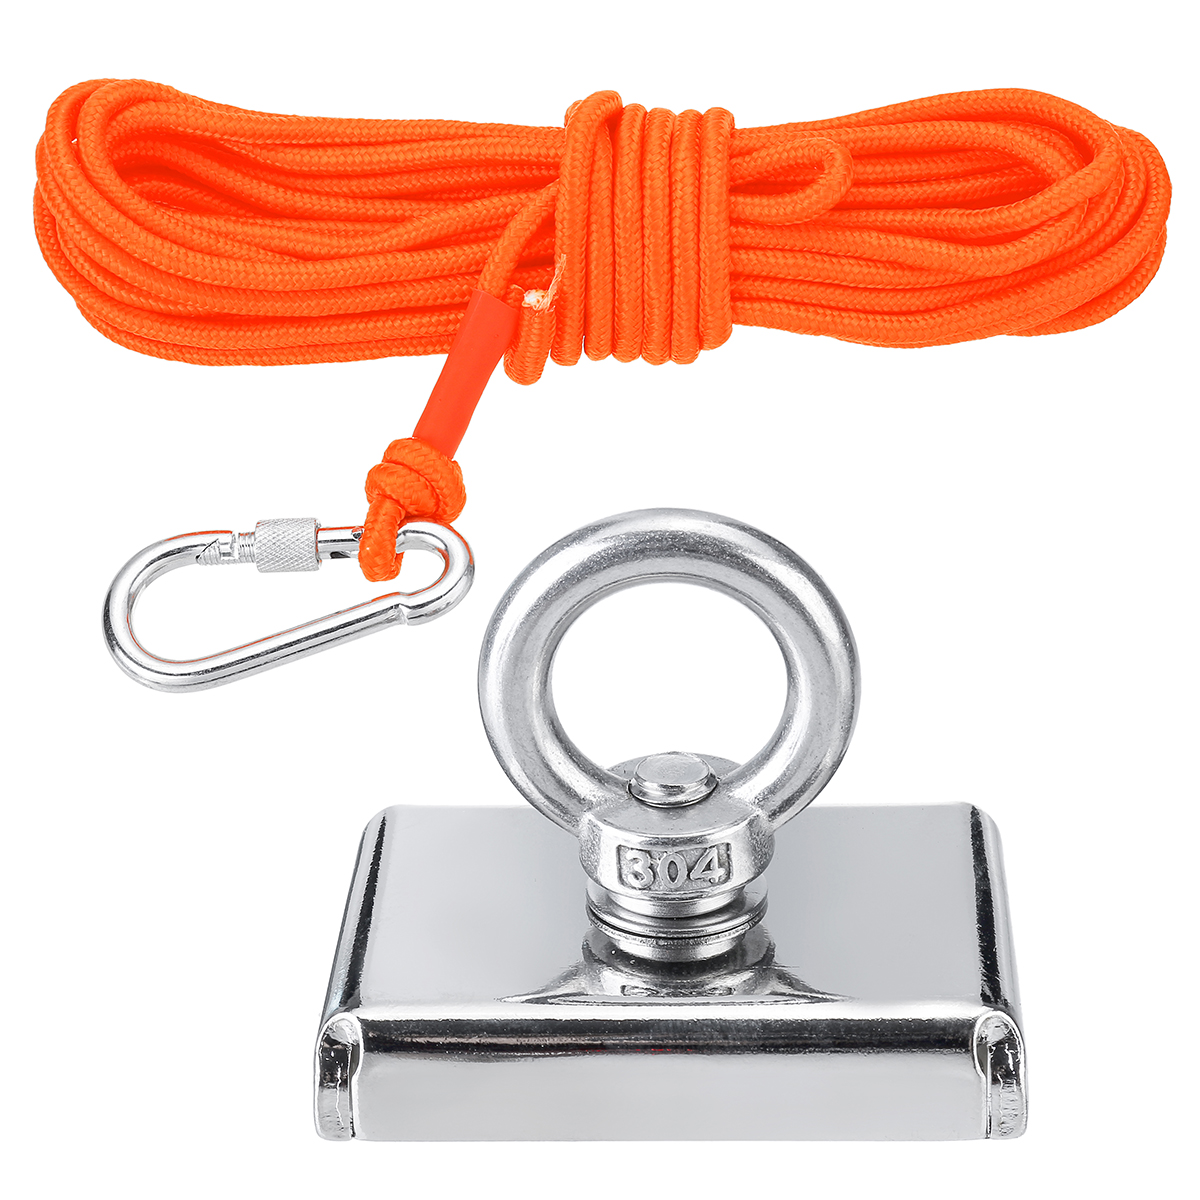 110KG-Double-Side-Neodymium-Fishing-Salvage-Recovery-Magnet-with-10M-Rope-for-Detecting-Metal-Treasu-1673070-1